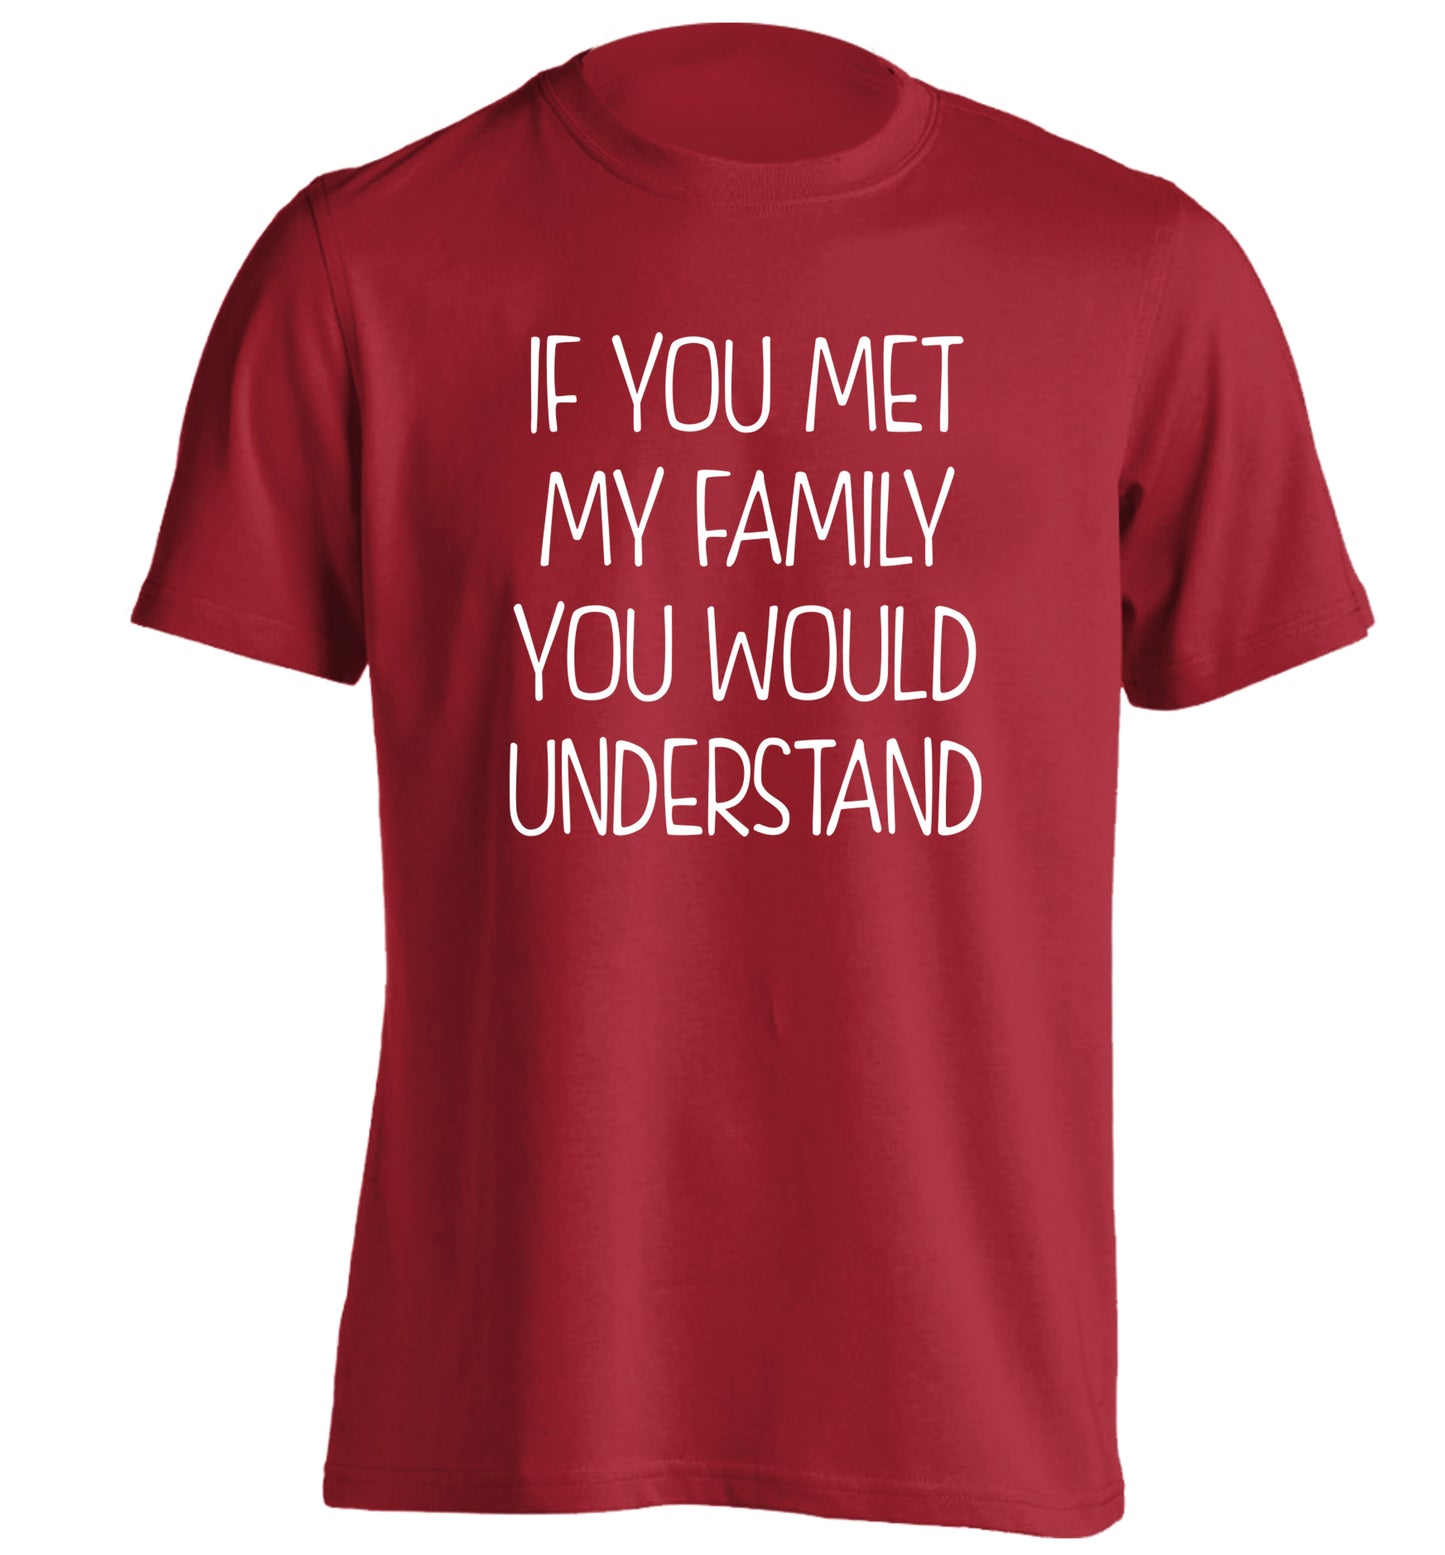 If you met my family you would understand adults unisex red Tshirt 2XL